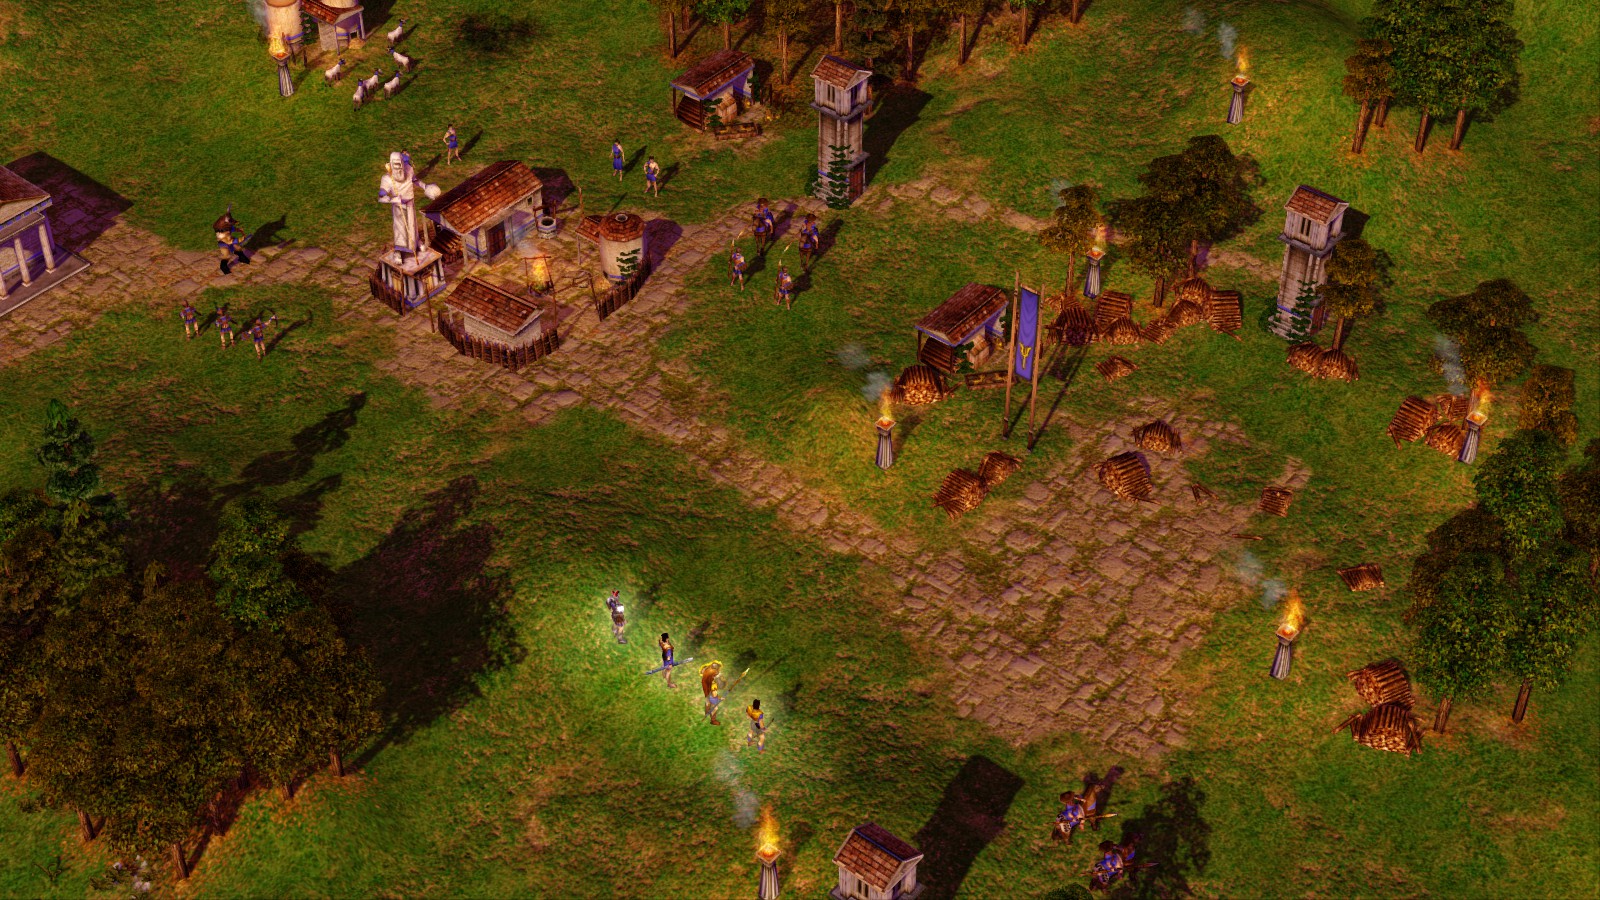 Age of mythology extended edition tale of the dragon free download